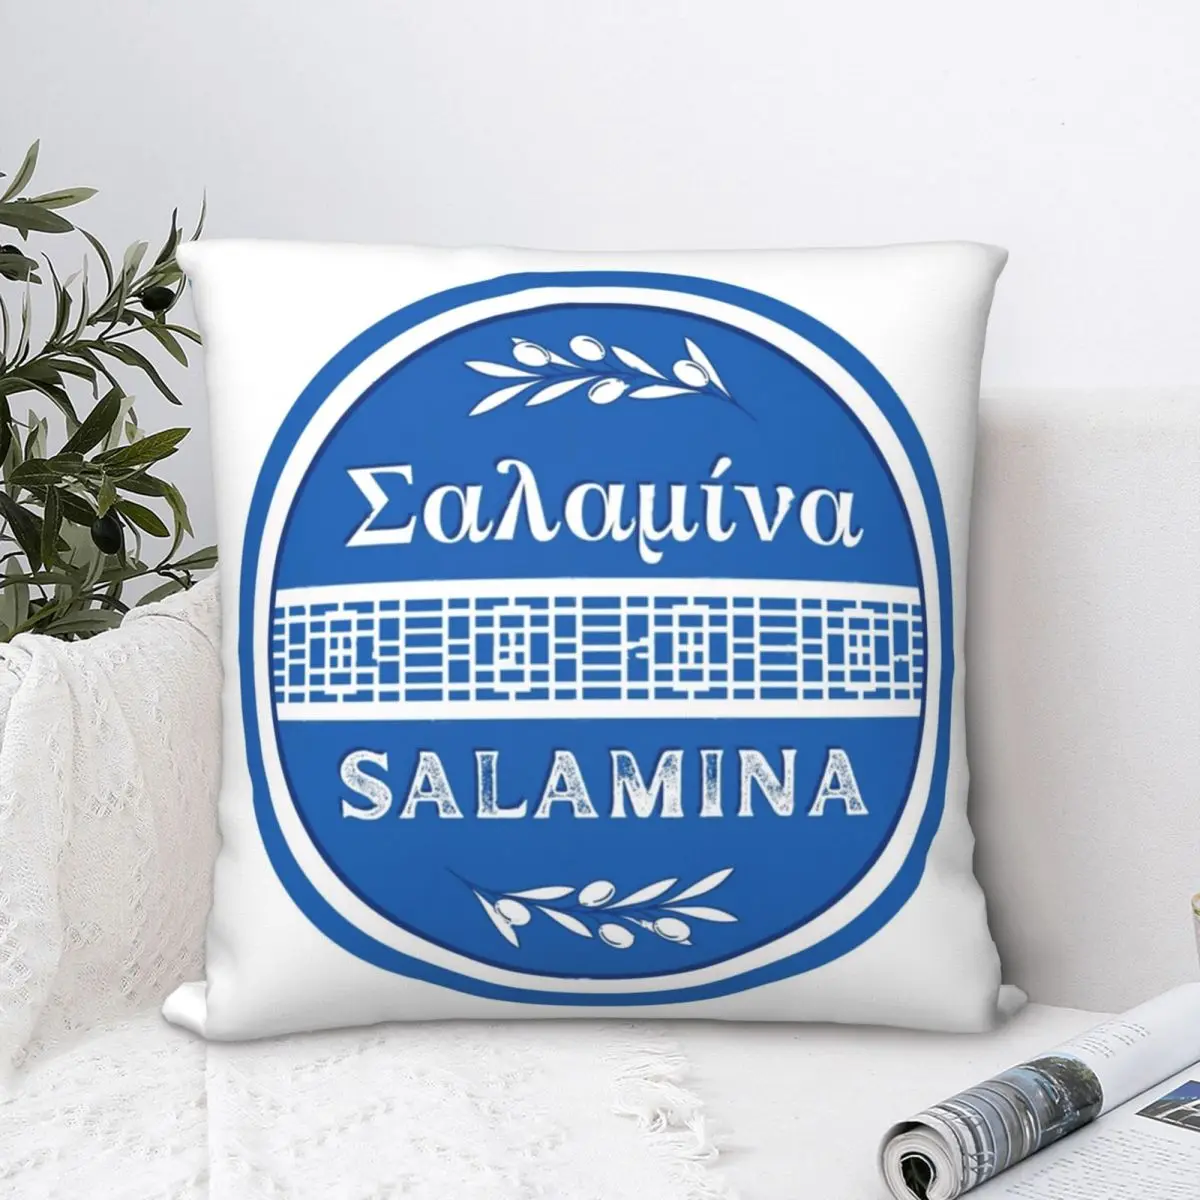 Greek Island Of Salamina Square Pillowcase Polyester Pillow Cover Velvet Cushion Zip Decorative Comfort Throw Pillow for home customized fashion home decoration pillowcase navy blue white greek european style square pillowcase cushion cover